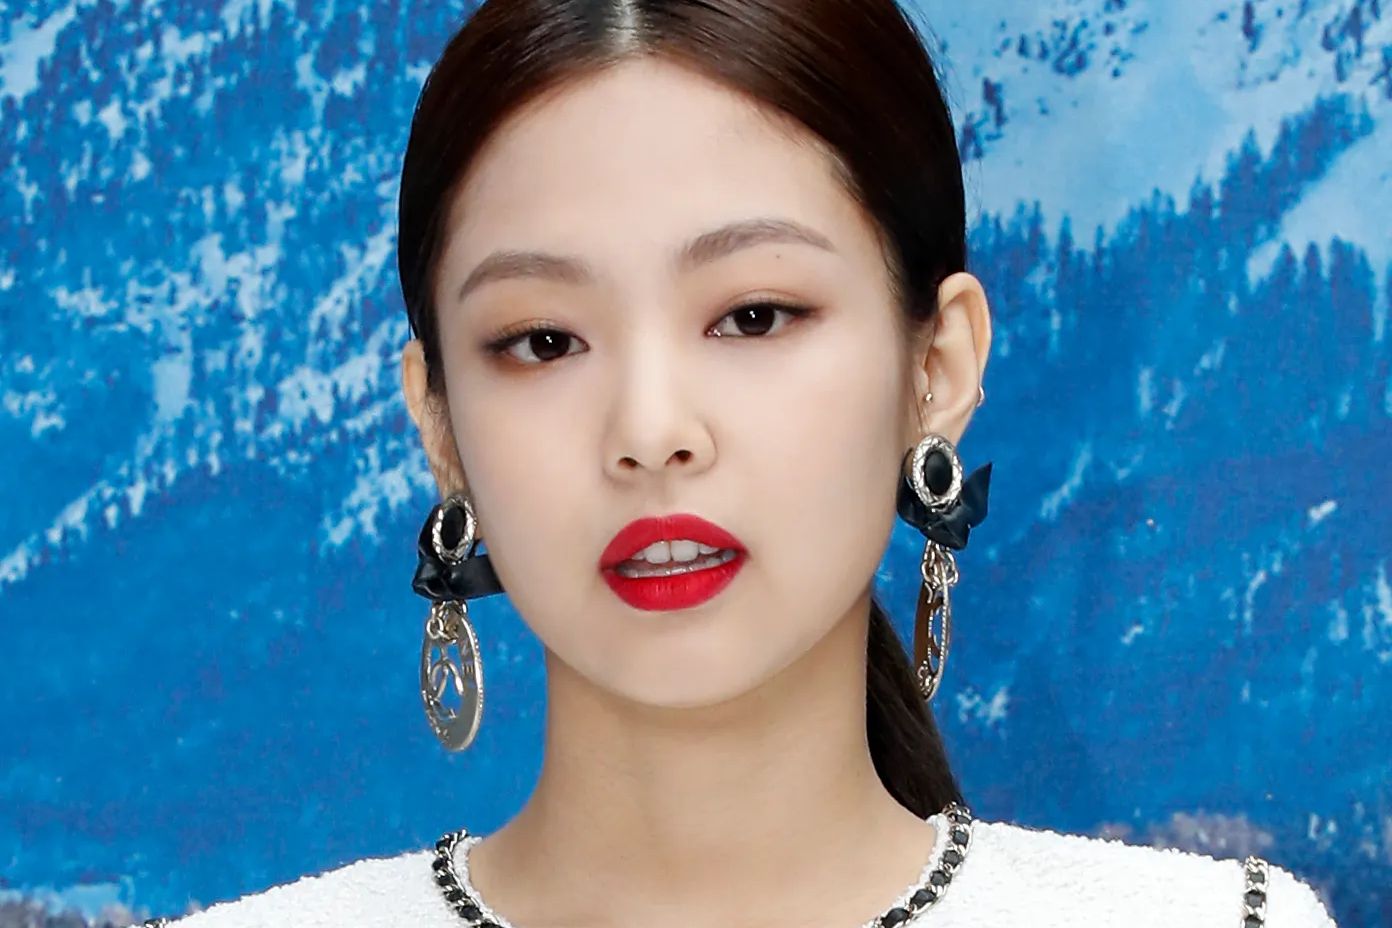 BLACKPINK's Jennie shows it all in wardrobe incident on stage